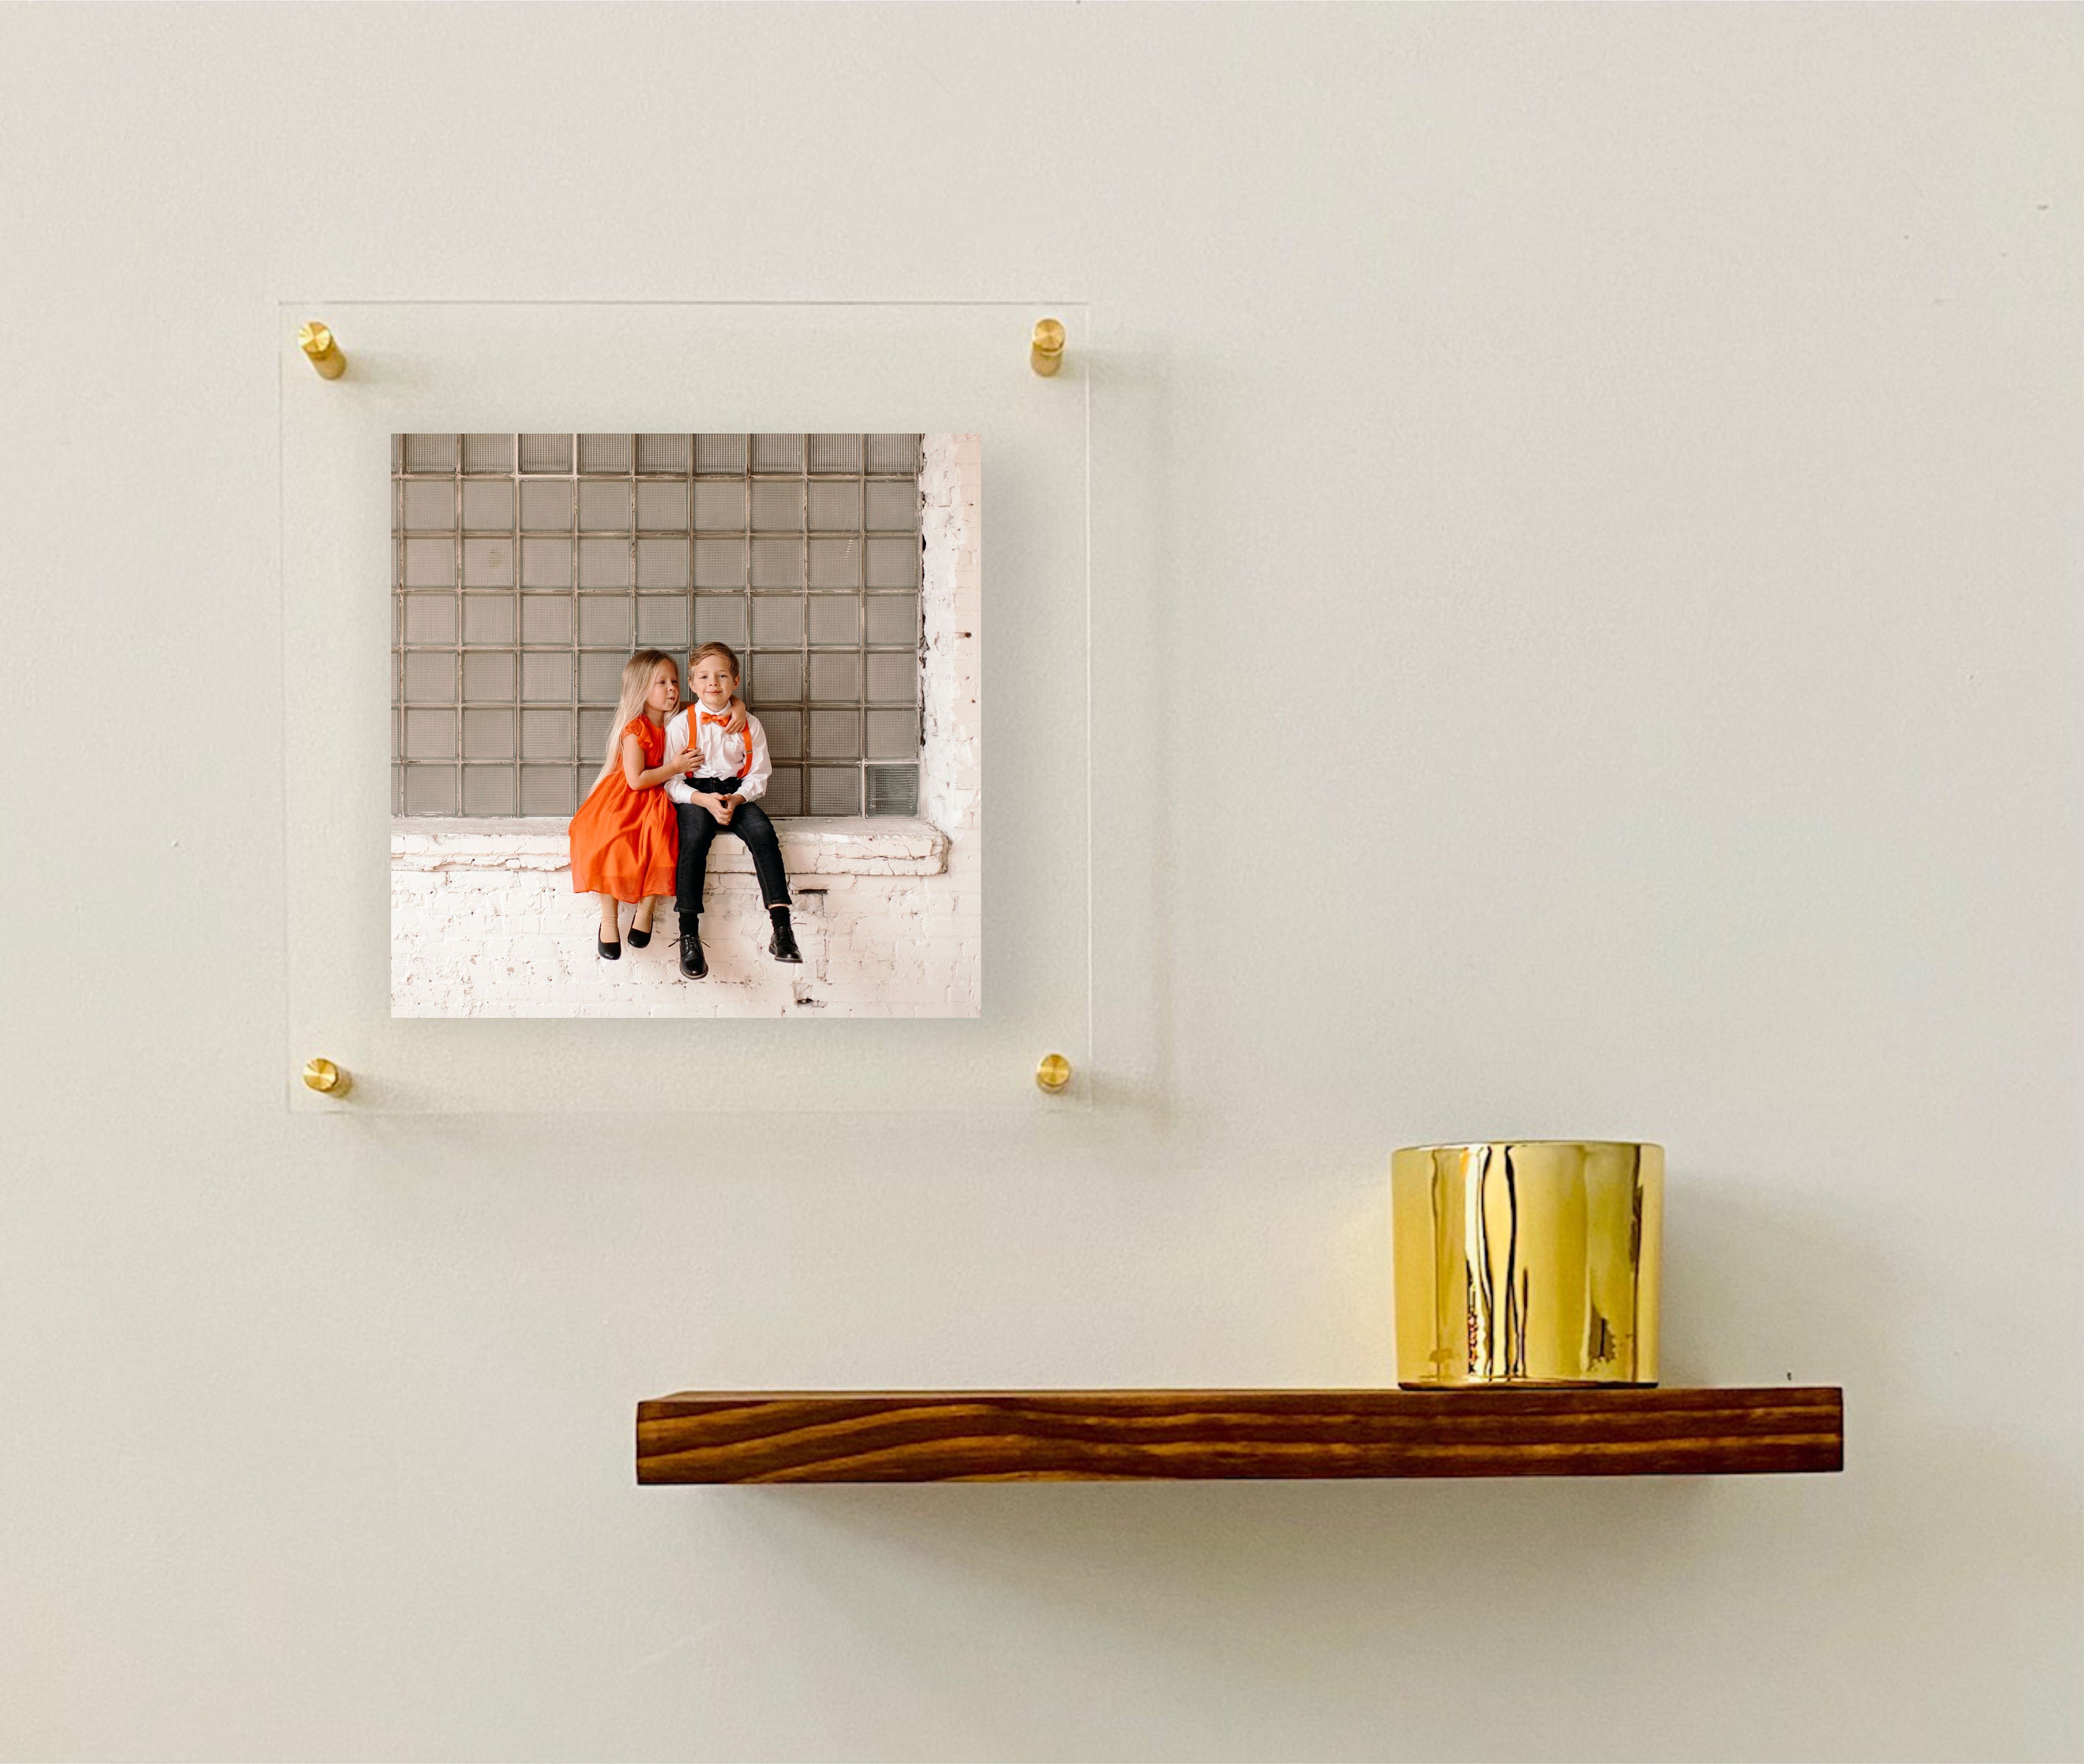 ONE WALL 16x20 Inch Floating Frame, Black Wood Double Glass Float Picture  Frame Display 16x20/11x14 Inch Photos or Plant or Petal Specimens for Wall